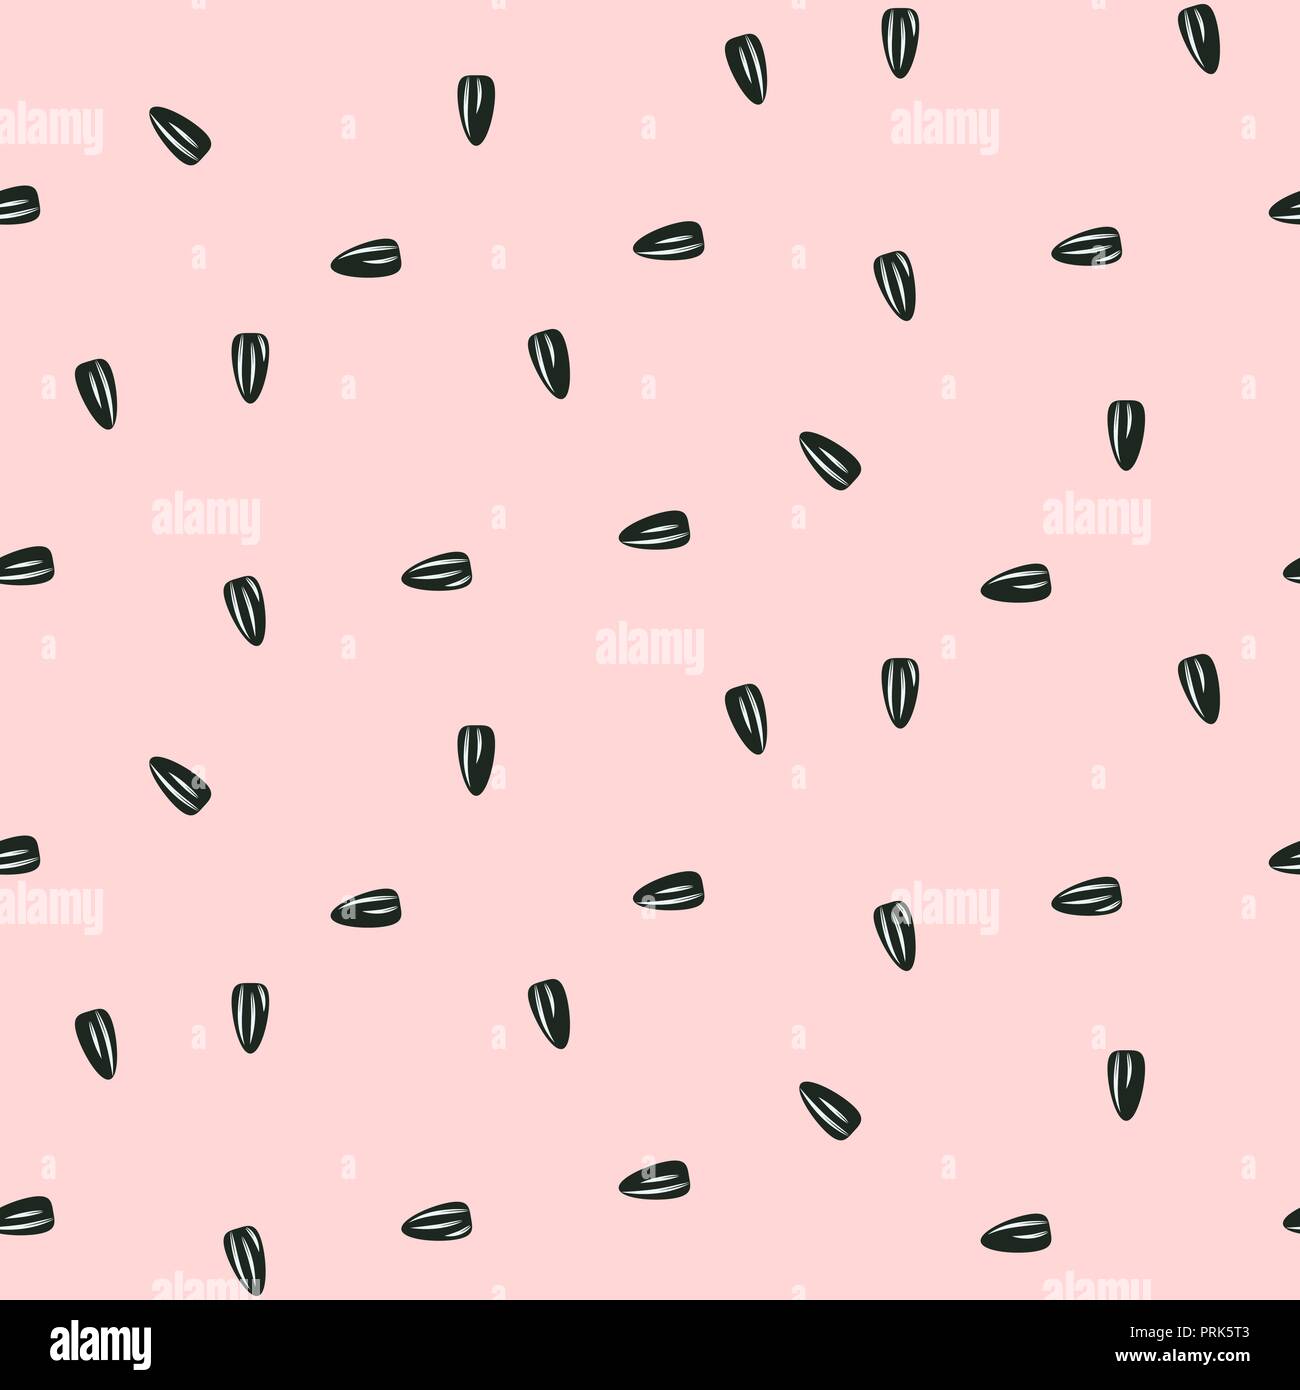 Sunflower seeds seamless vector pattern on pink background. Stock Vector